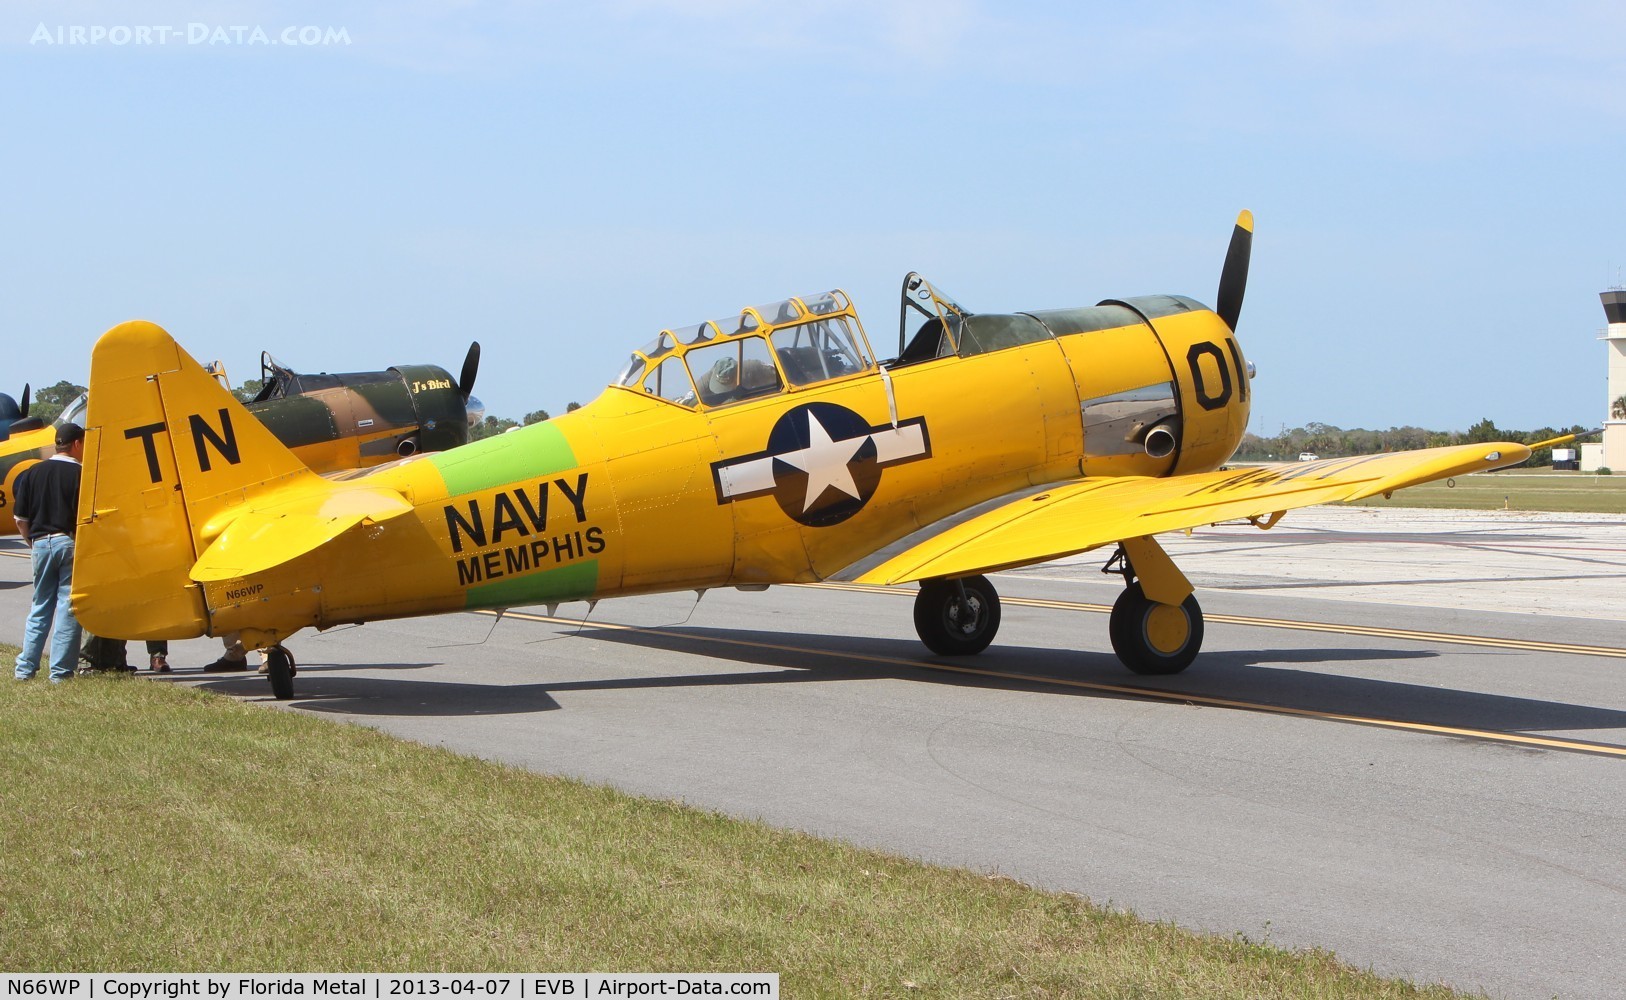 N66WP, 1951 North American T-6G Texan C/N 182-792, T-6G Painted as an SNJ